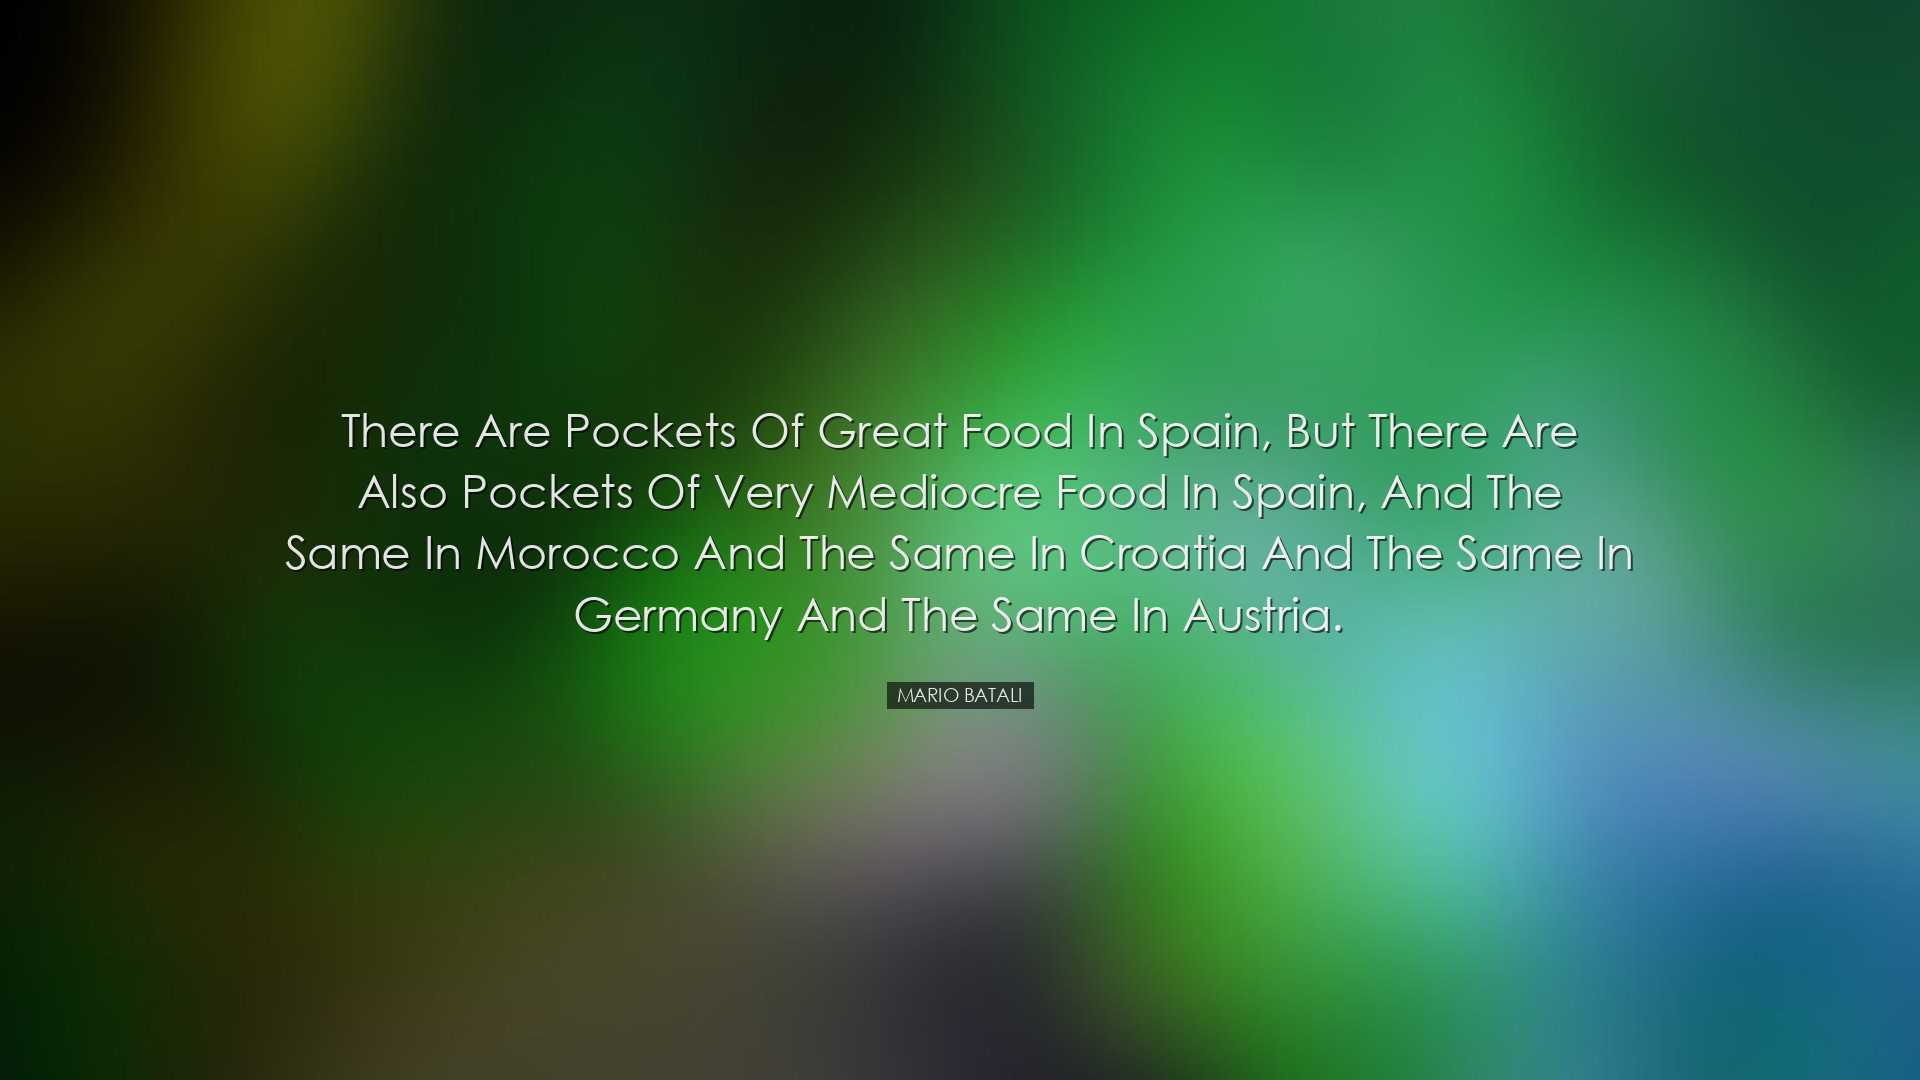 There are pockets of great food in Spain, but there are also pocke